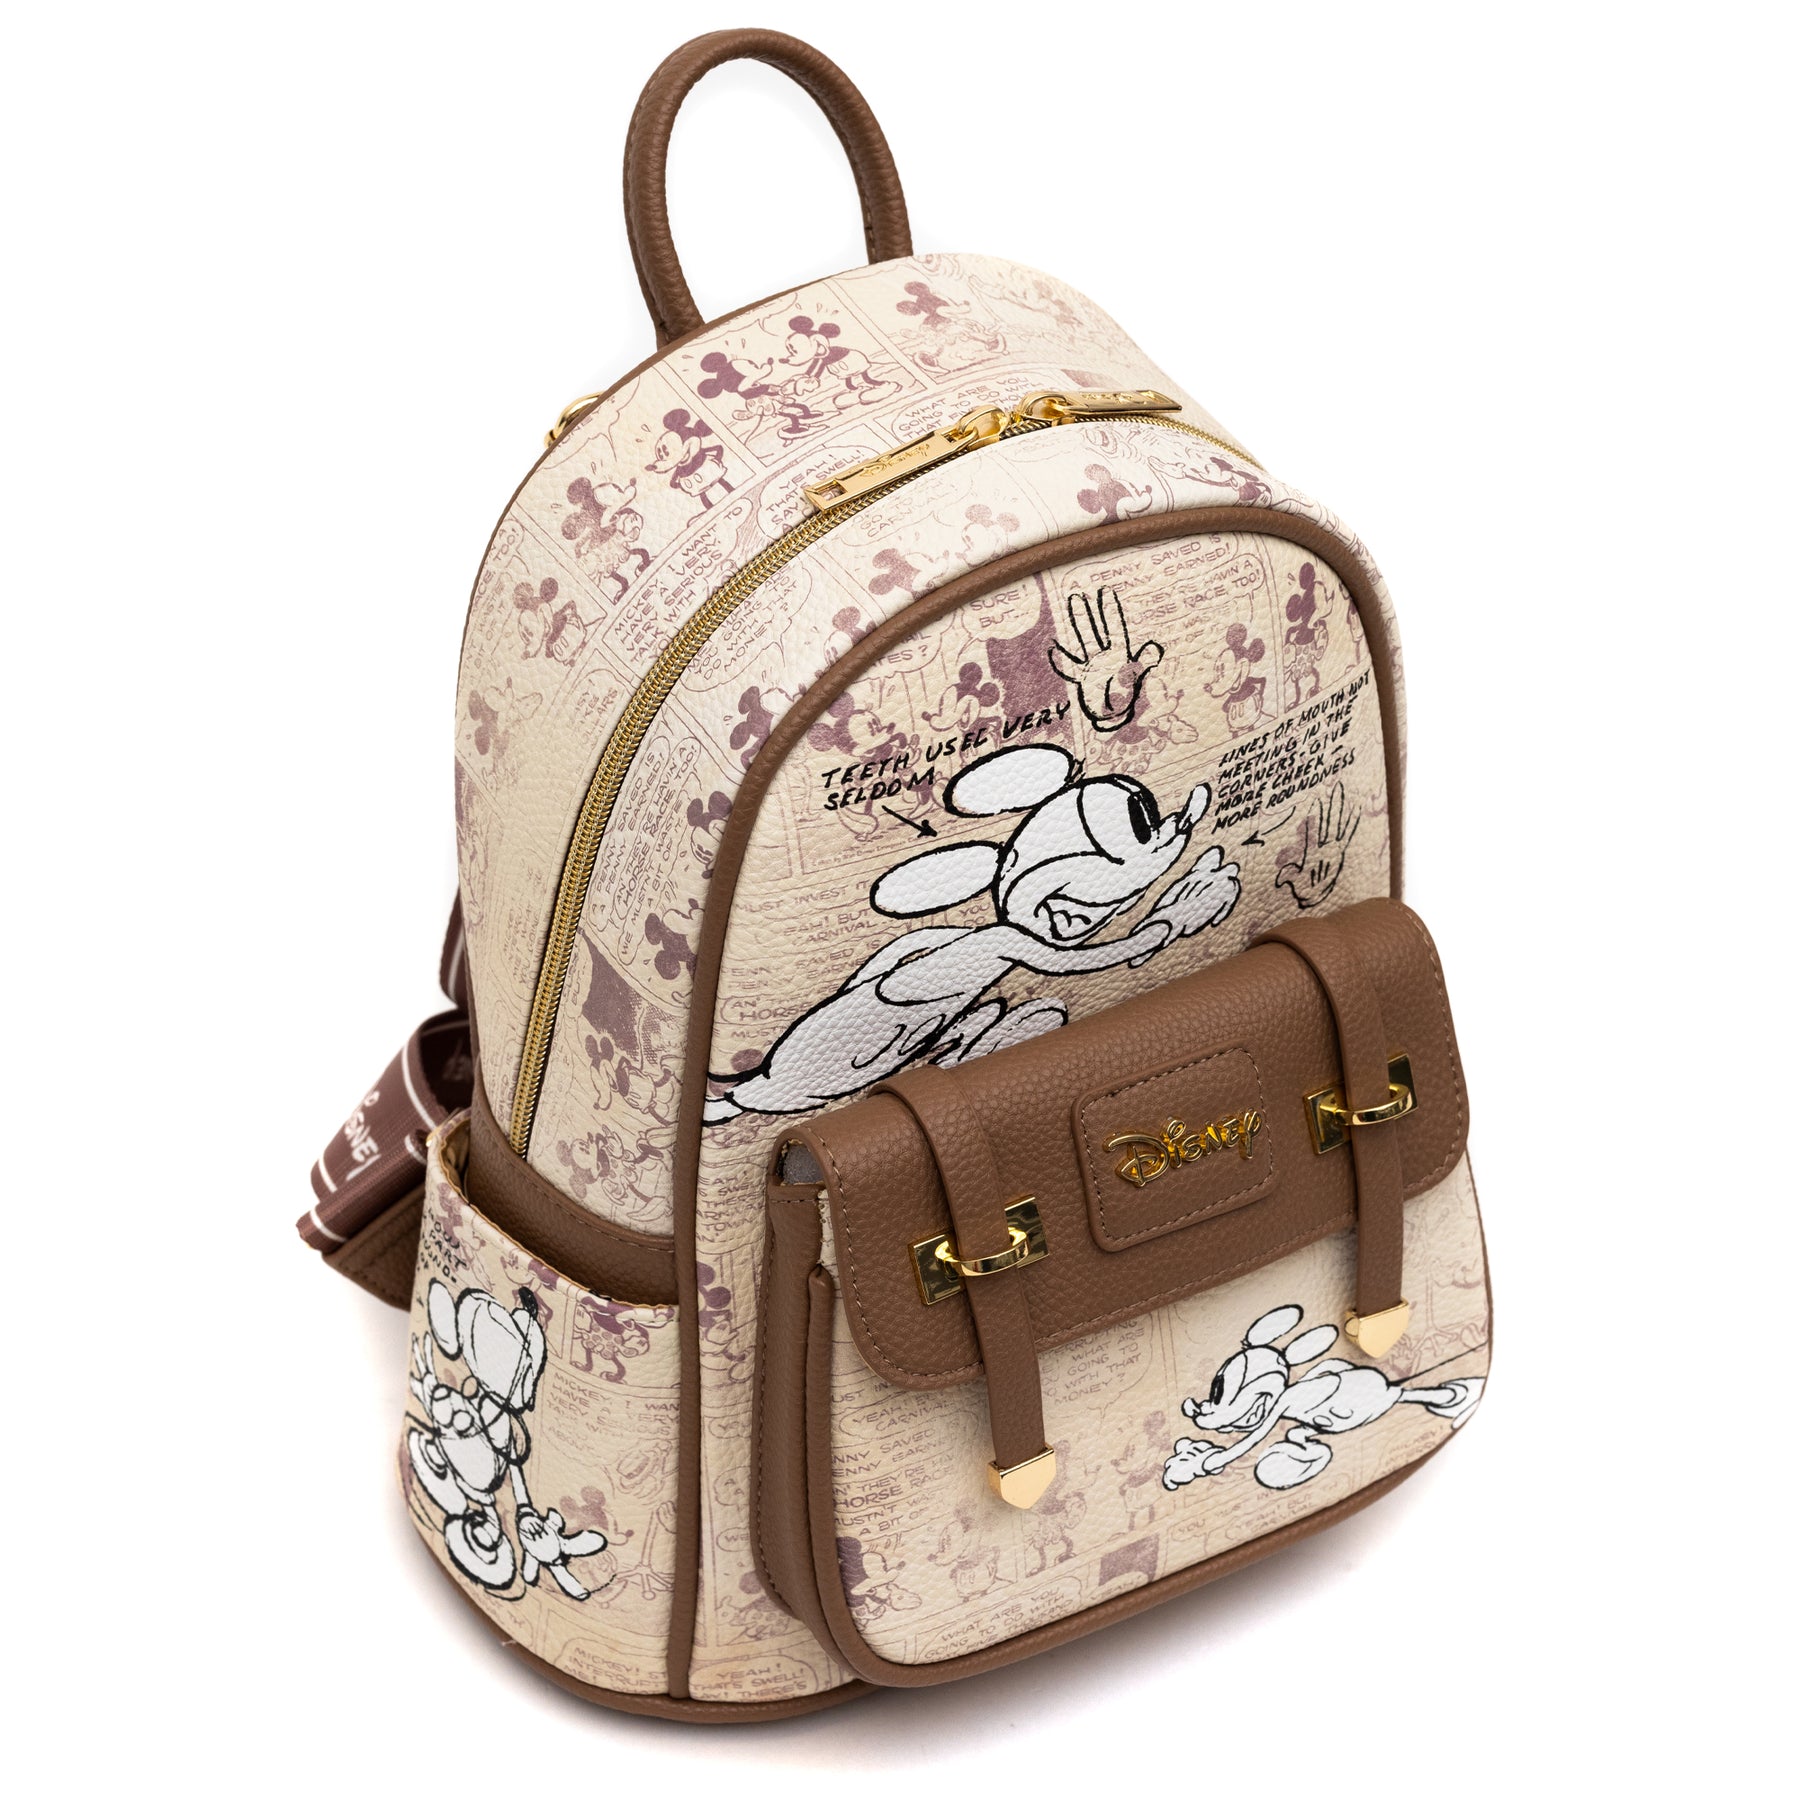 Wondapop Luxe - Disney Minnie Mouse Mini Backpack - Limited Edition